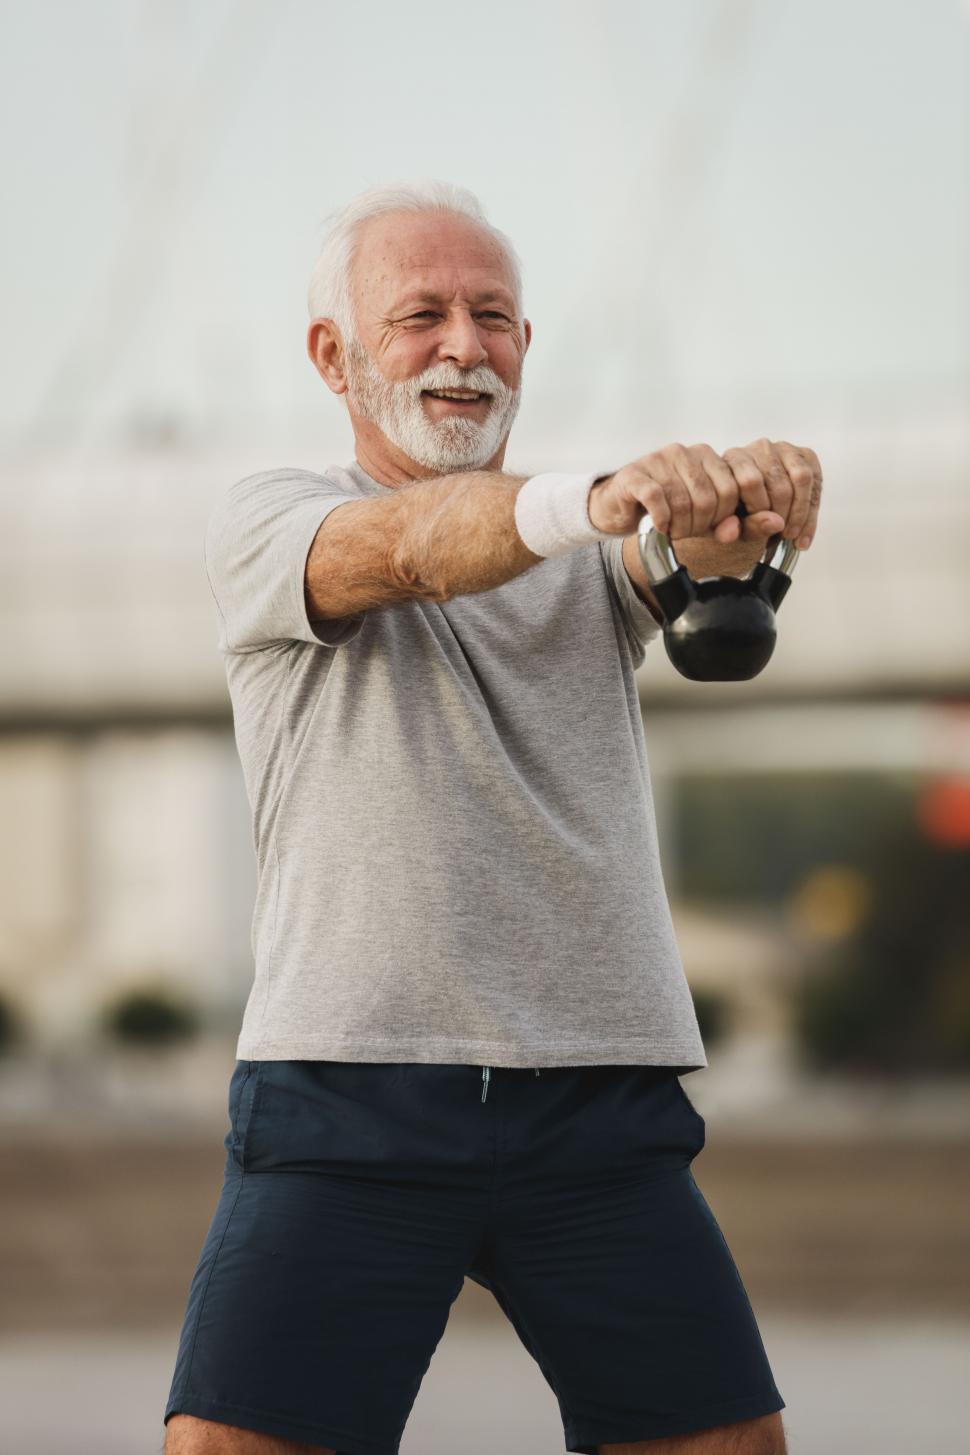 Free Stock Photo of Senior old man with dumbbell | Download Free Images and Free Illustrations